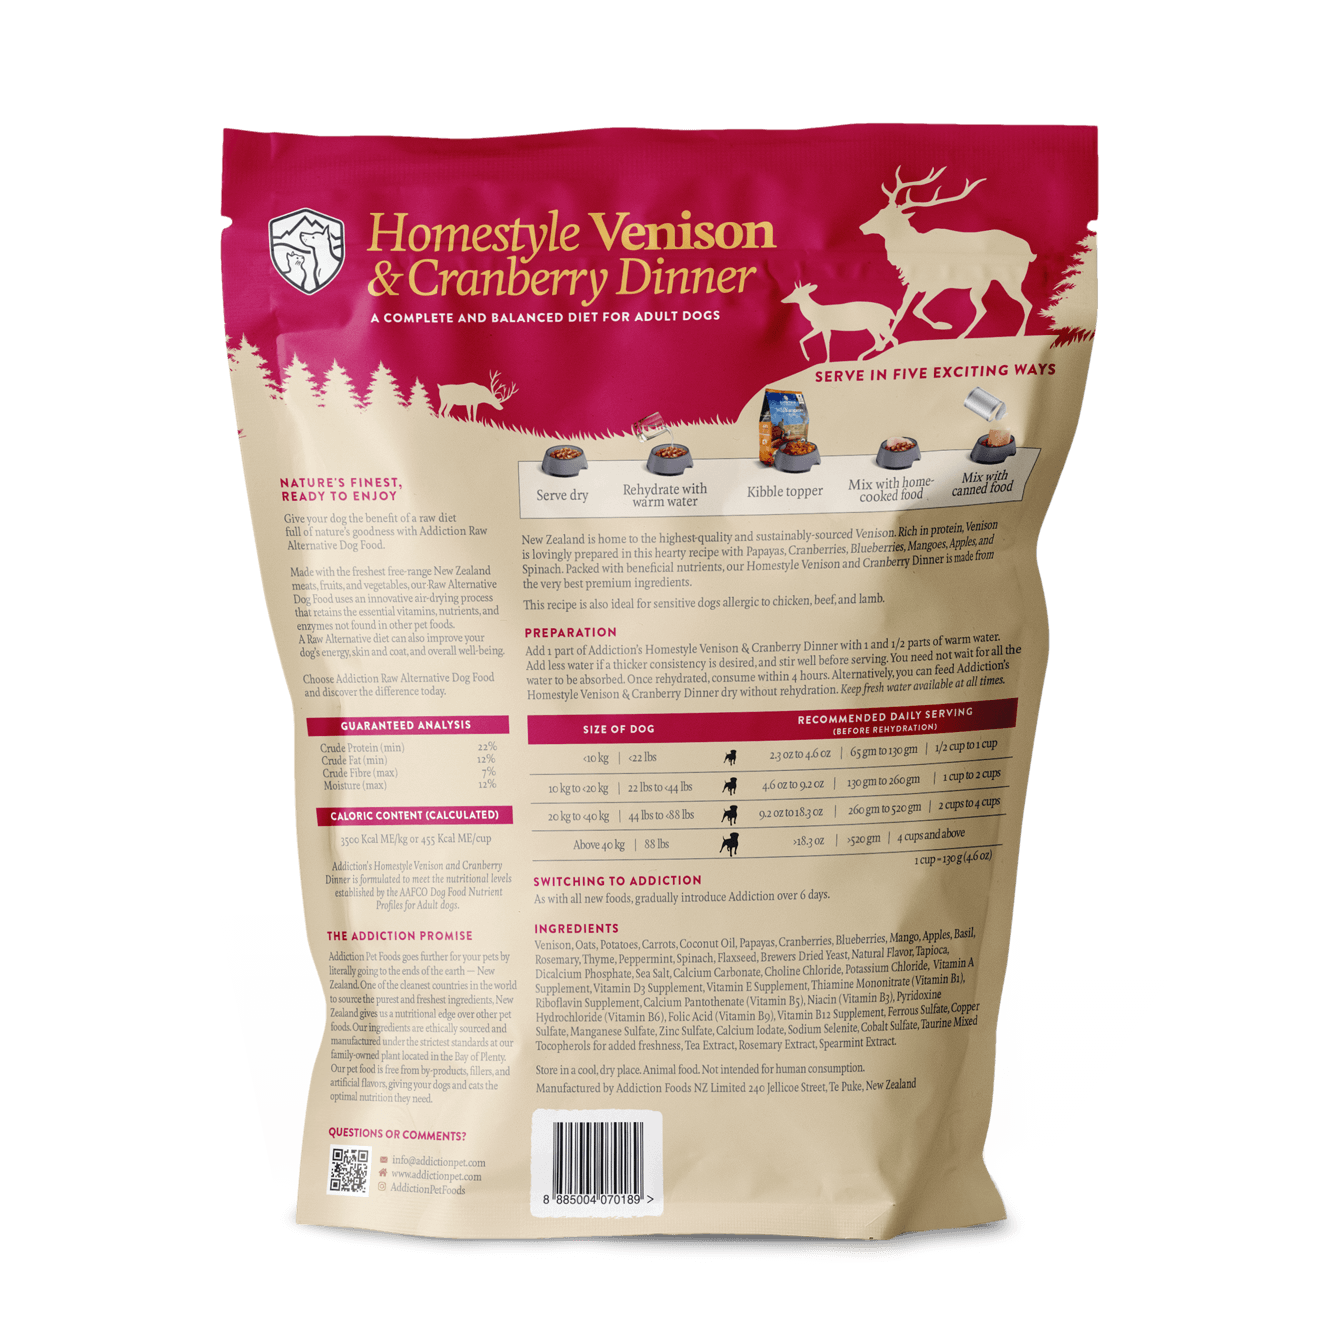 Addiction Homestyle Venison & Cranberry Dinner Raw Dehydrated Food for Dogs (2lbs)